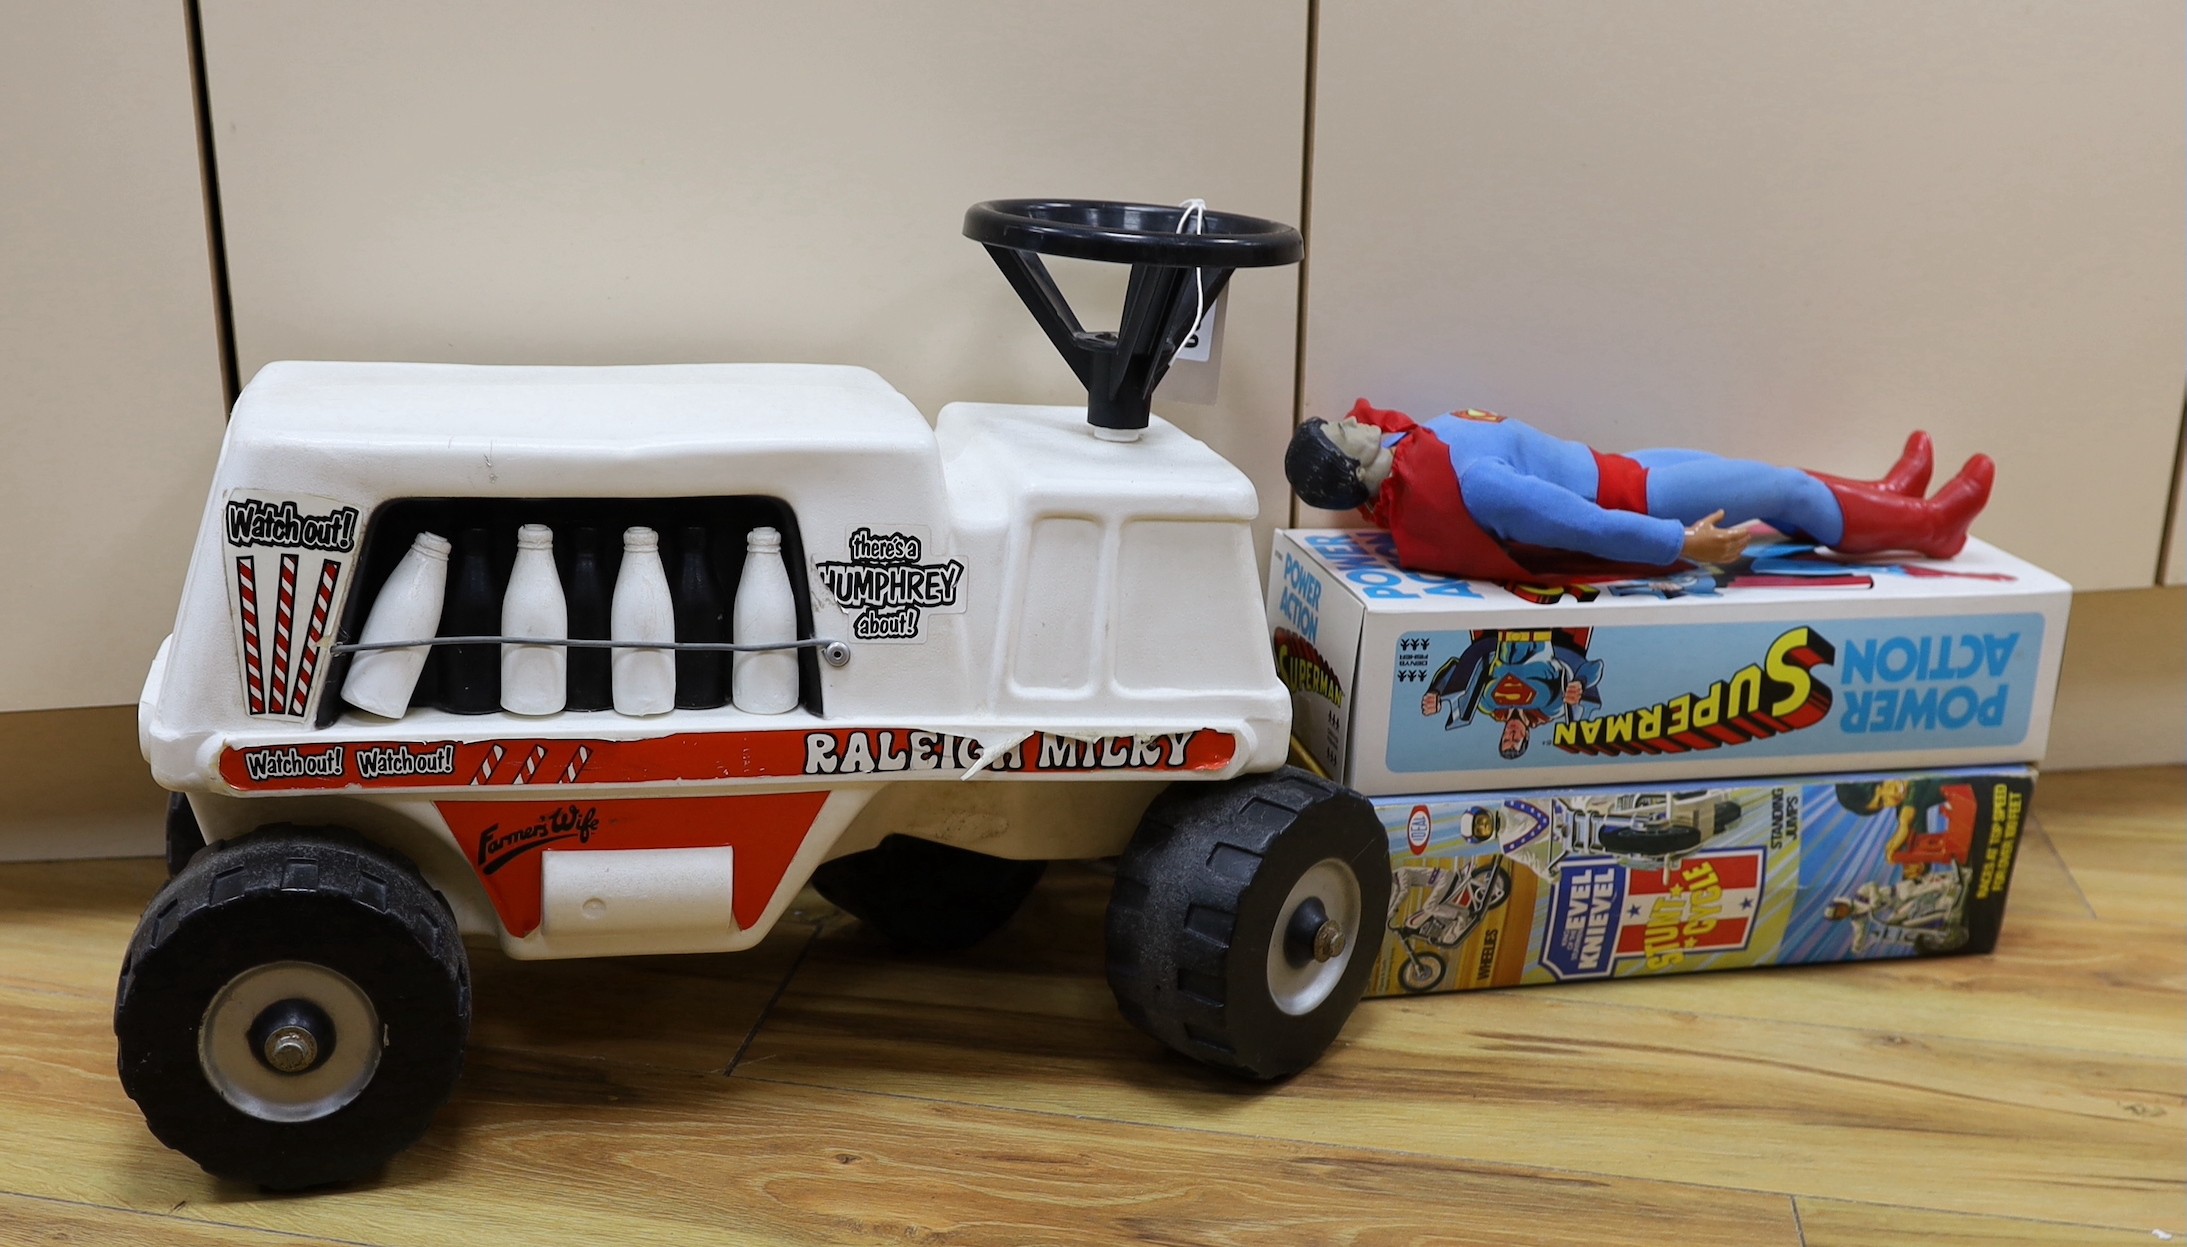 A Denys Fisher Superman, rare in original box, another unboxed, a Unigate milk float with bottles, and a boxed Evel Knievel Stunt Cycle                                                                                     